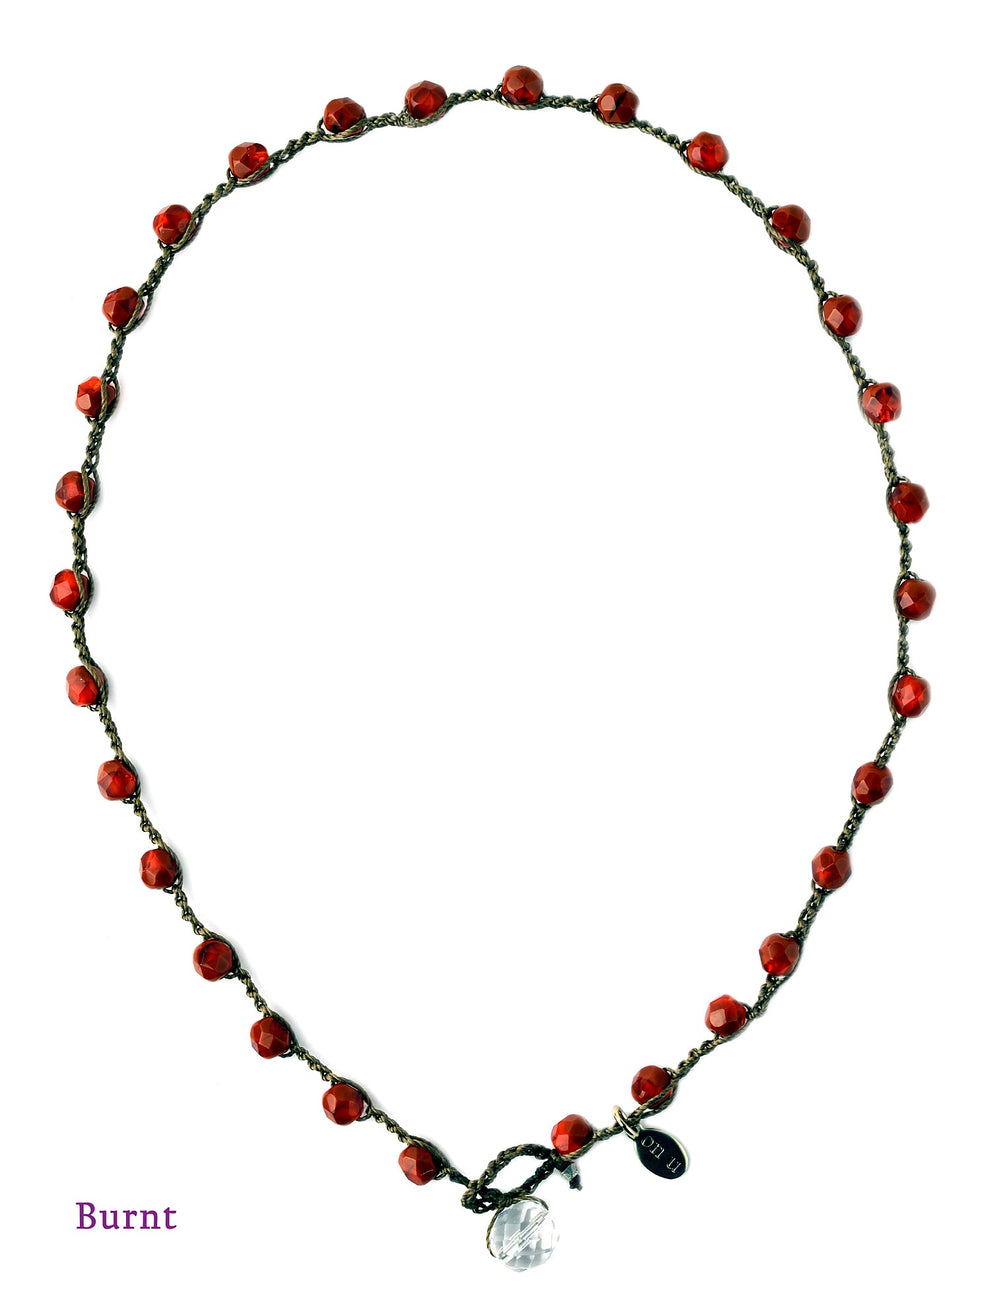 Dot Necklaces - Large Bead - by On U Jewelry